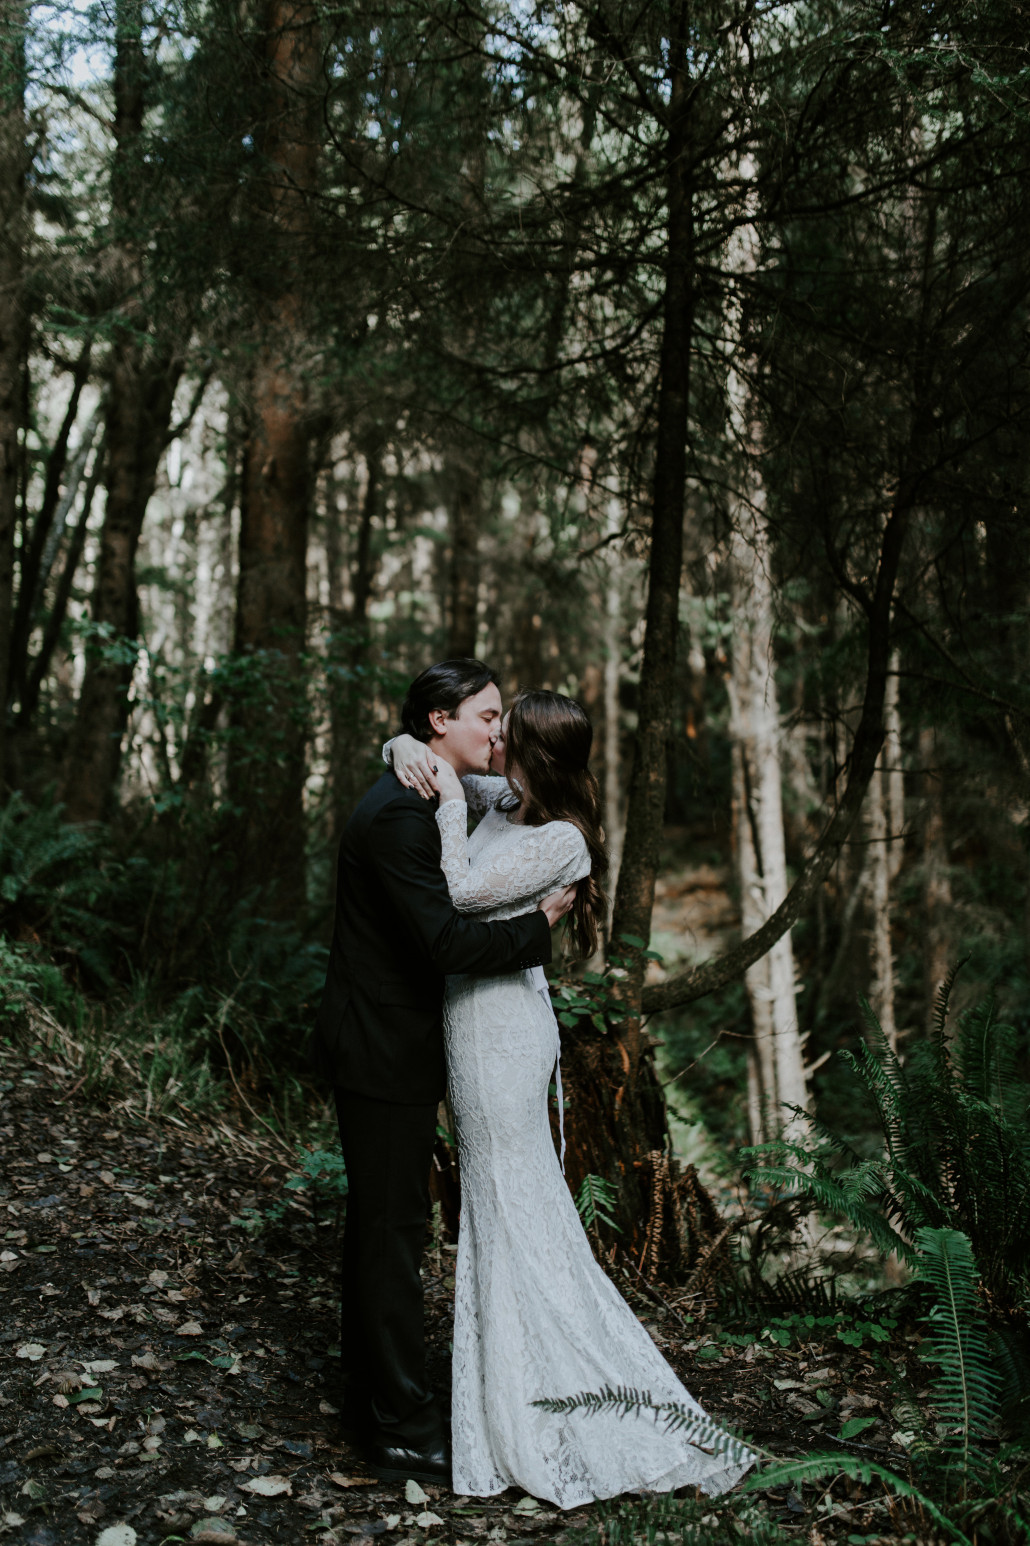 Nicole and Vlad seal their vows with a kiss. Elopement wedding photography at Cannon Beach by Sienna Plus Josh.